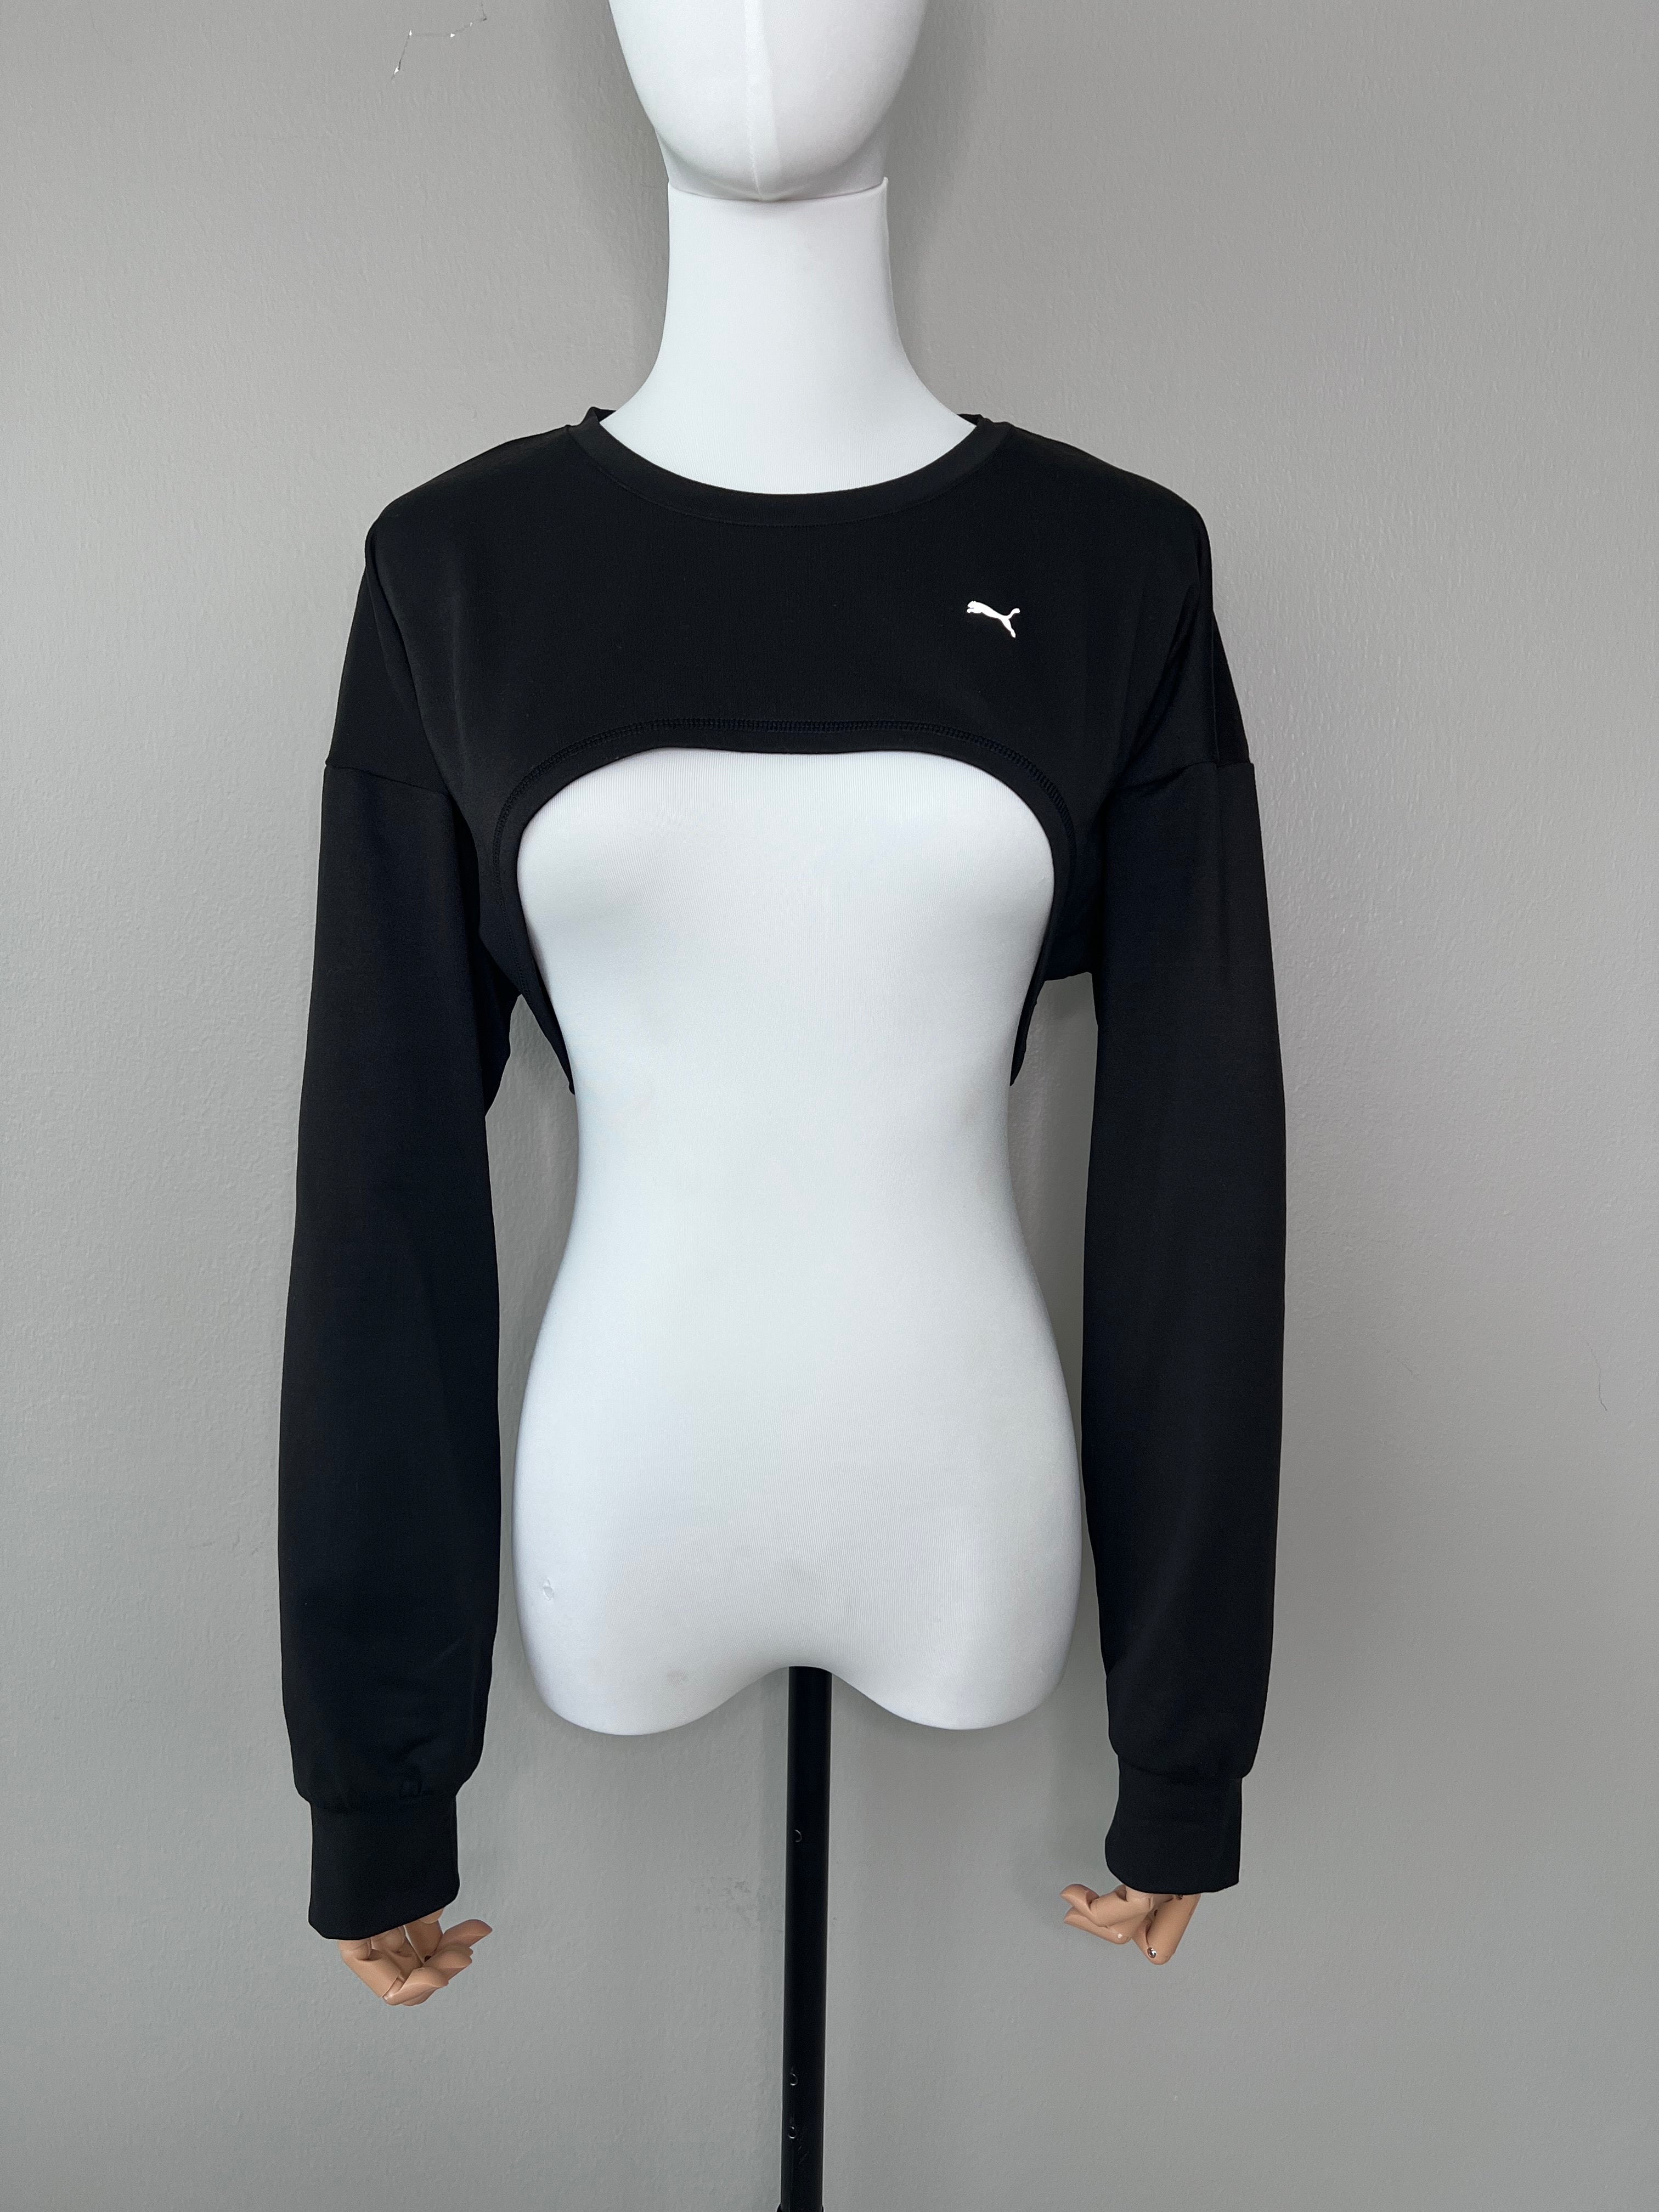 BRAND NEW ! Black Forever Luxe Cloudspun Long-sleeveTop - PUMA